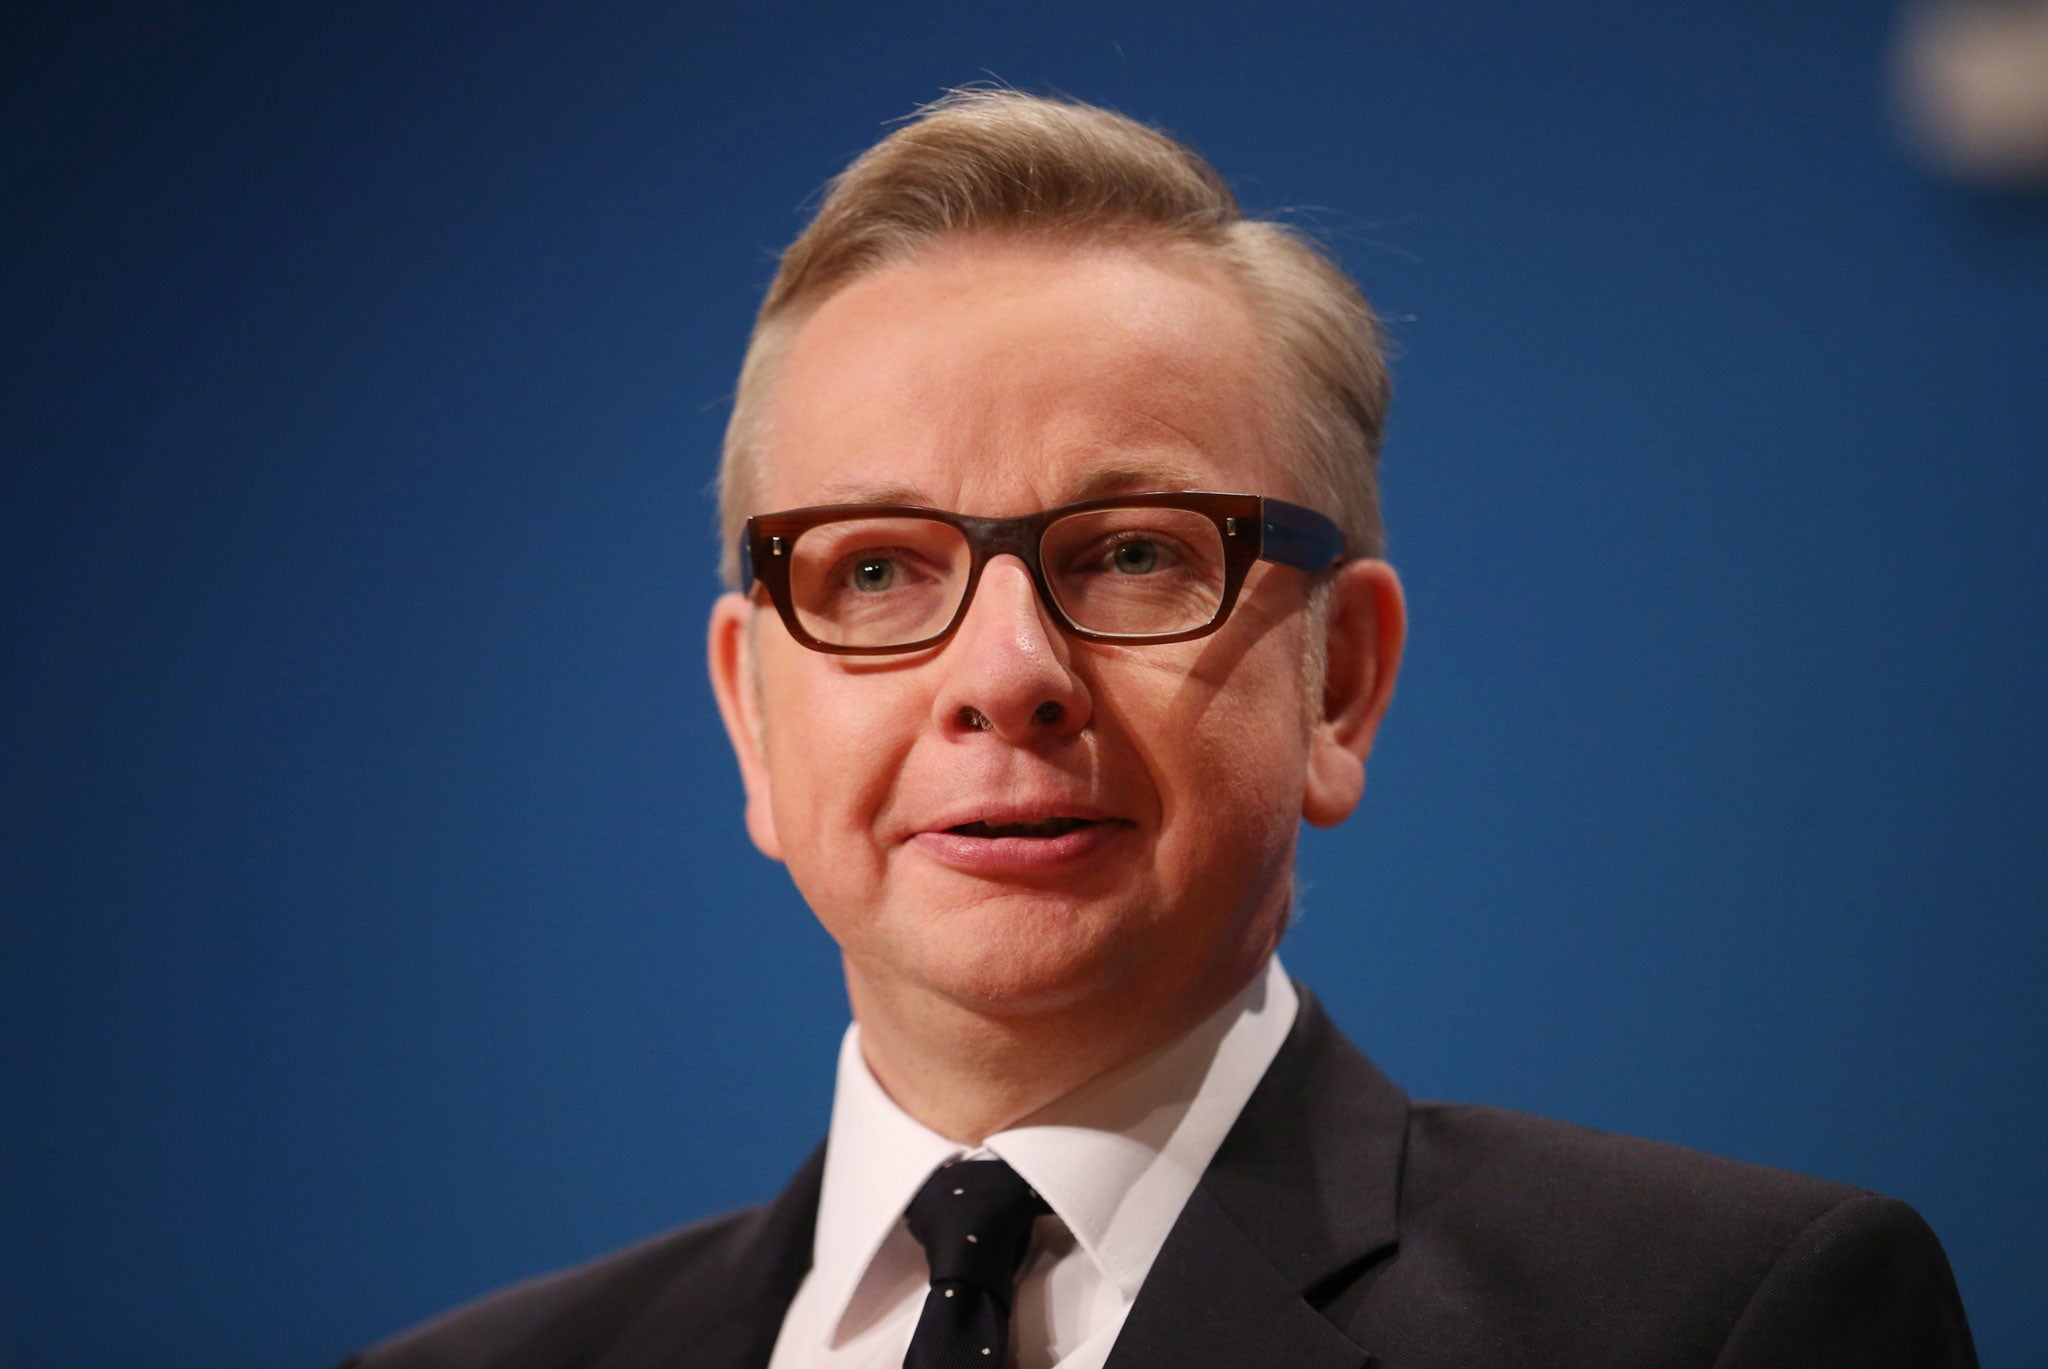 The Conservatives will not make a deal with any other party, claims Michael Gove (Getty)